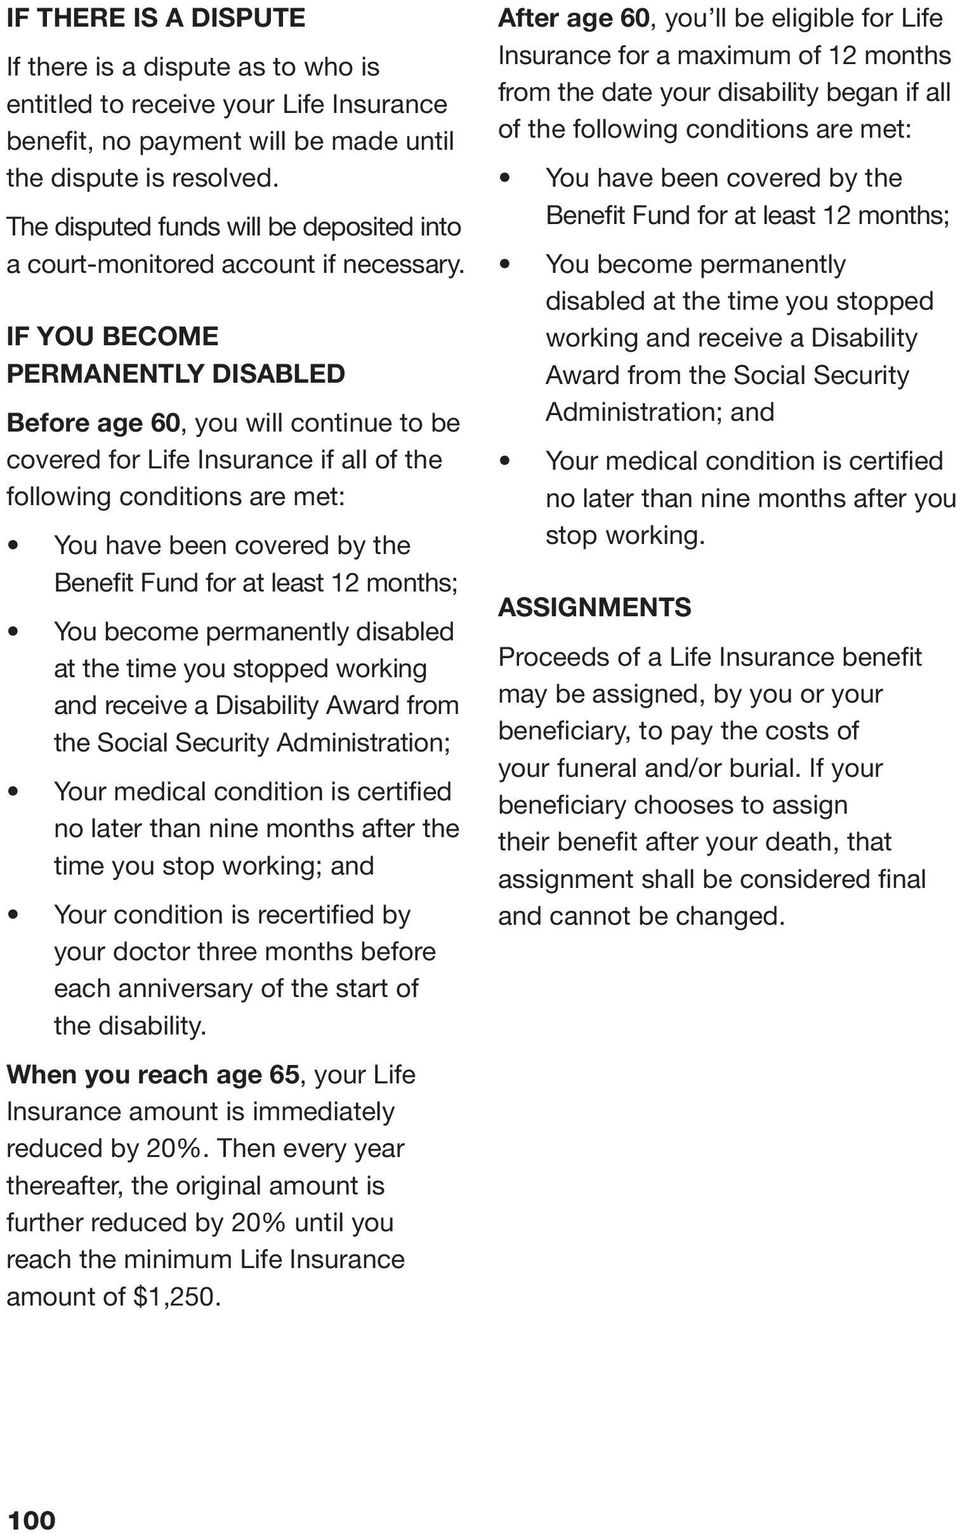 IF YOU BECOME PERMANENTLY DISABLED Before age 60, you will continue to be covered for Life Insurance if all of the following conditions are met: You have been covered by the Benefit Fund for at least